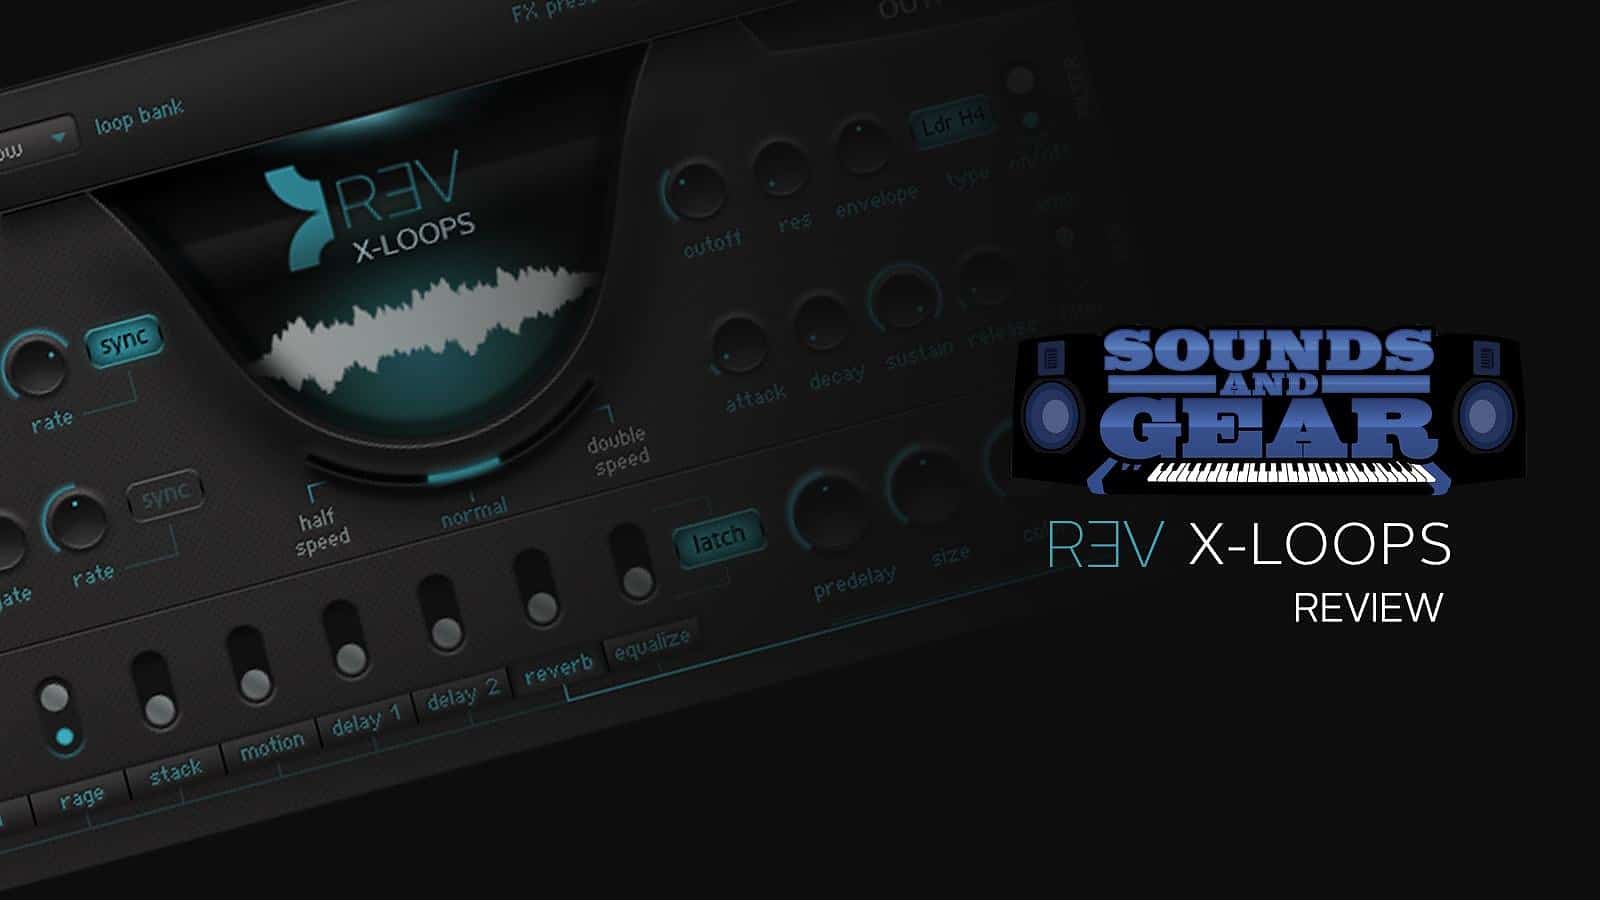 REV X-LOOPS REVIEW - Sounds and Gear